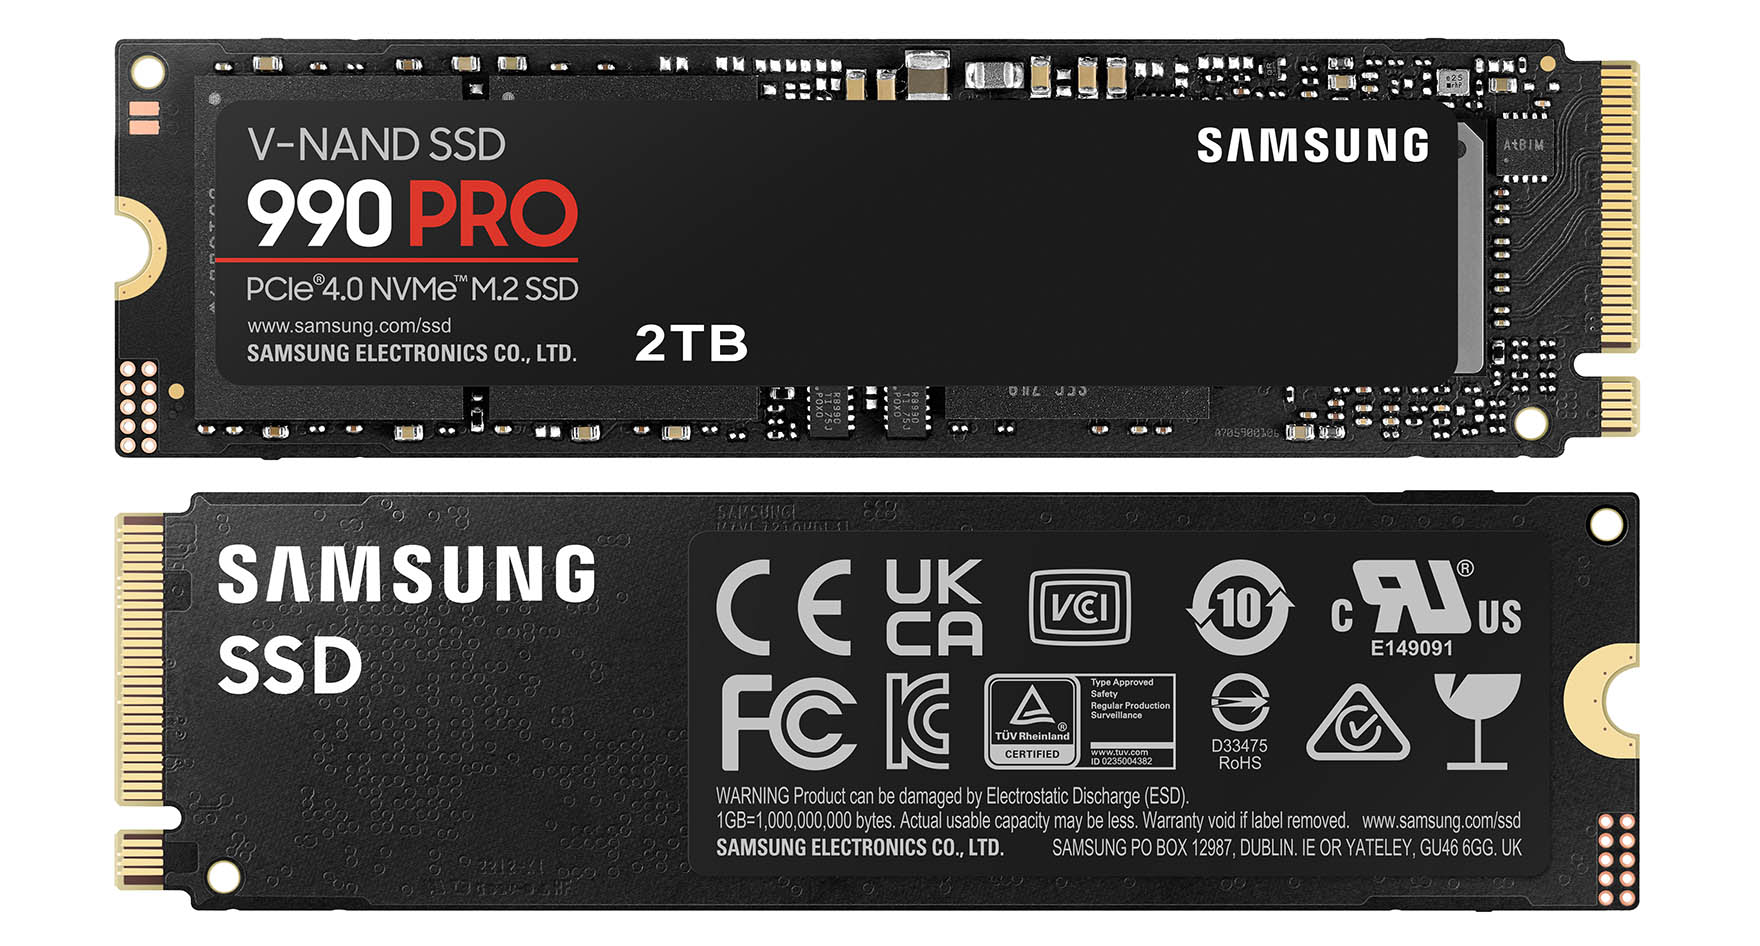 Disque SSD 1 To Gen.4 NVMe Samsung M.2 990 PRO MZ-V9P1T0BW